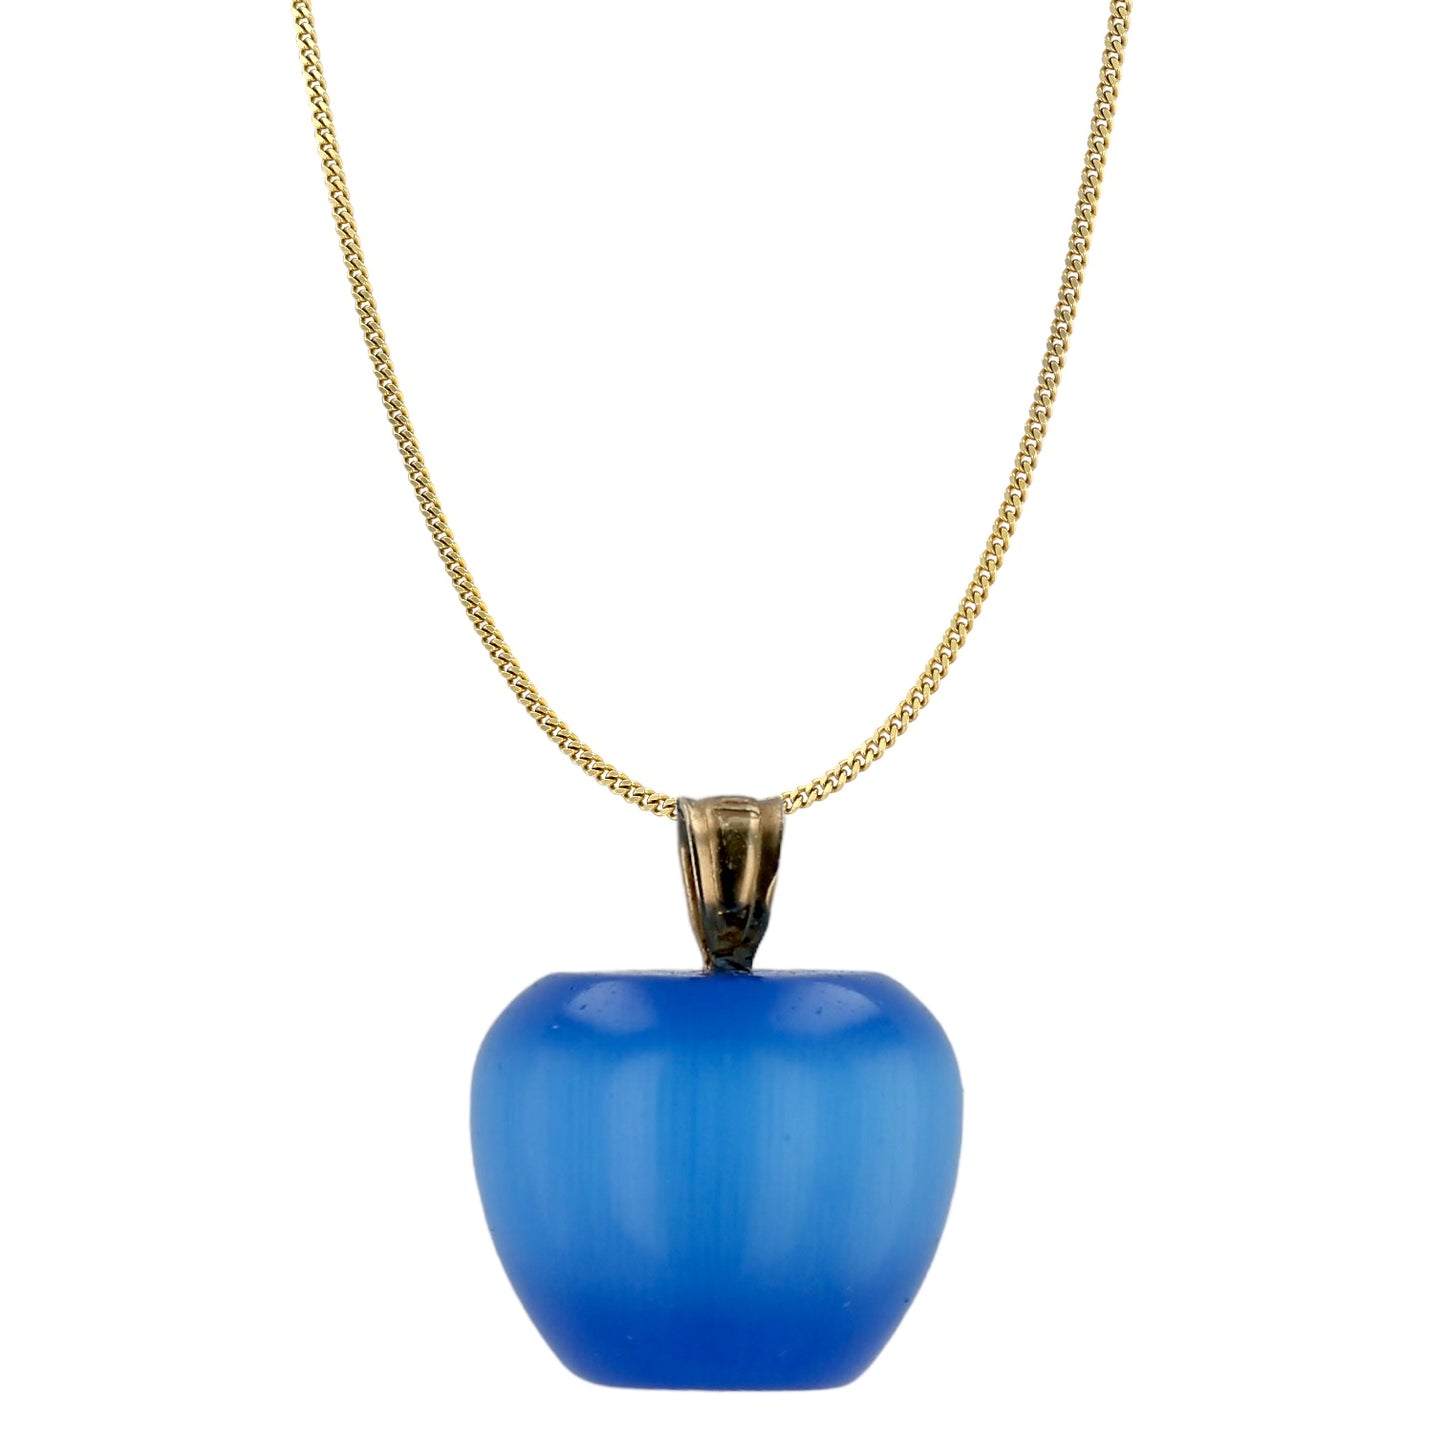 10K Yellow gold blue  Apple necklace-4537